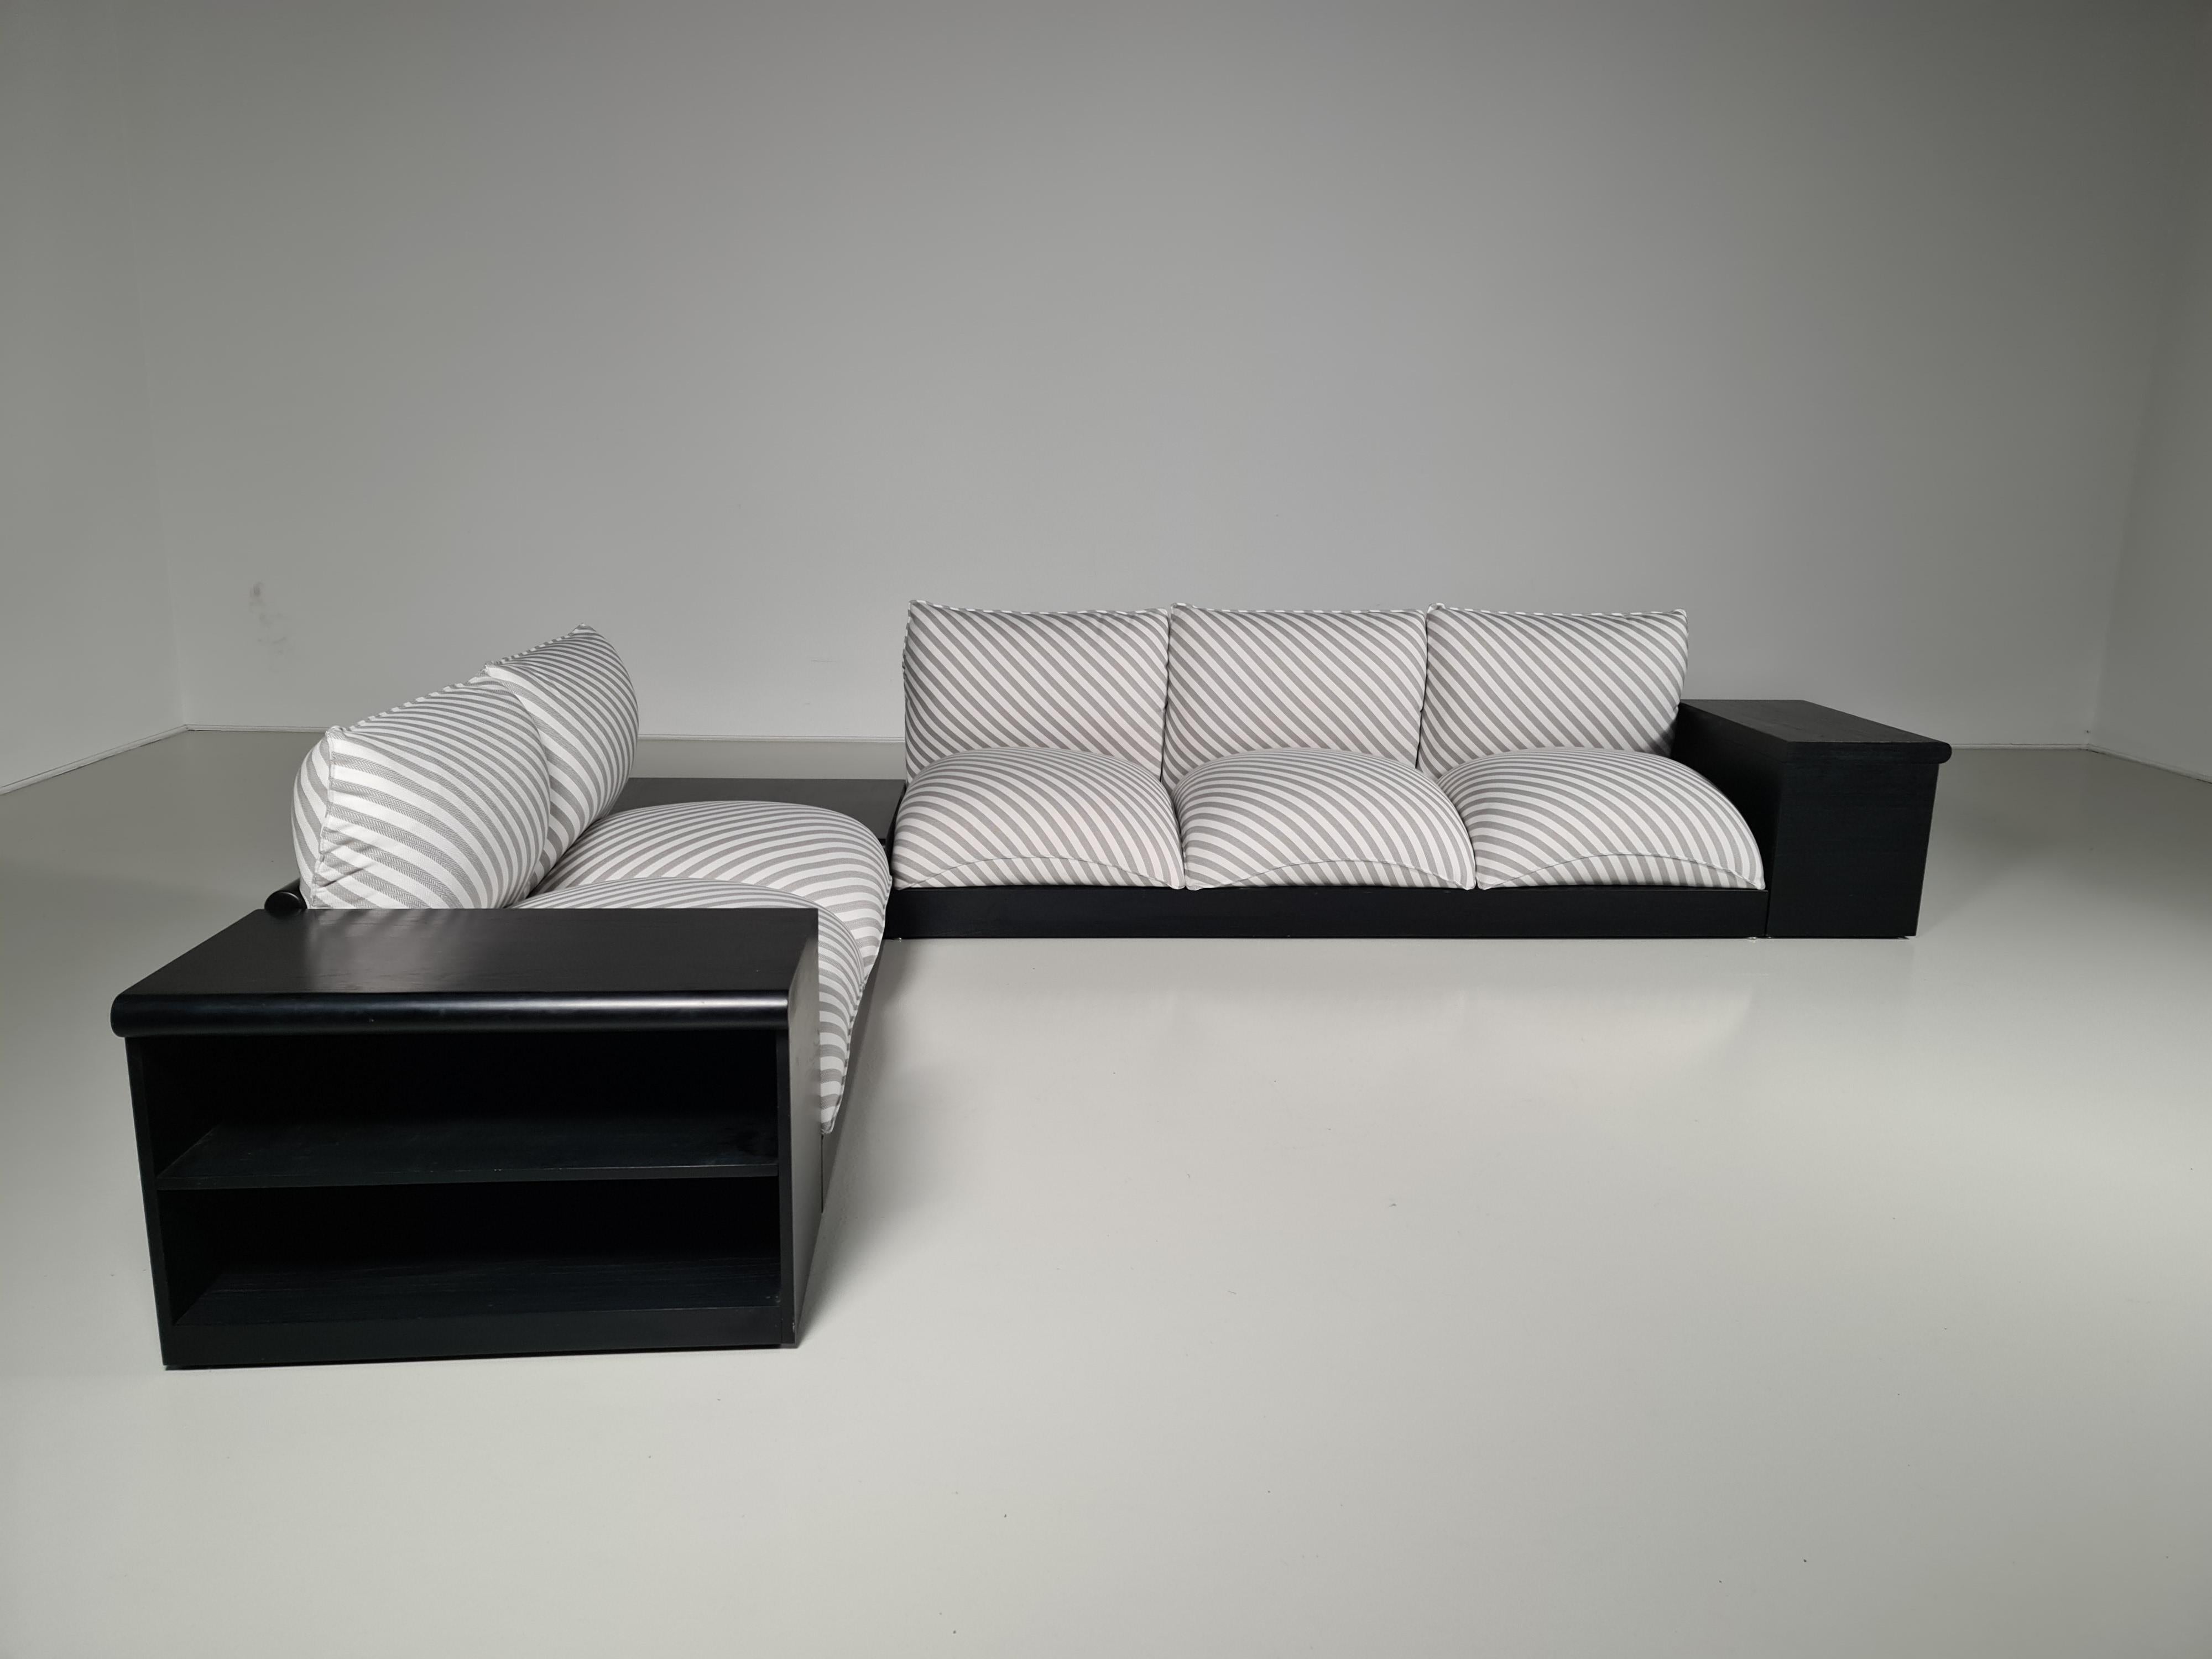 Carlo Bartoli Down (Blob) sofa set, 1970s, Italy.

The most amazing seating set in excellent original condition. Reupholstered in a fantastic striped grey and white fabric. The base is made from black wood. The seats are firm and are filled with